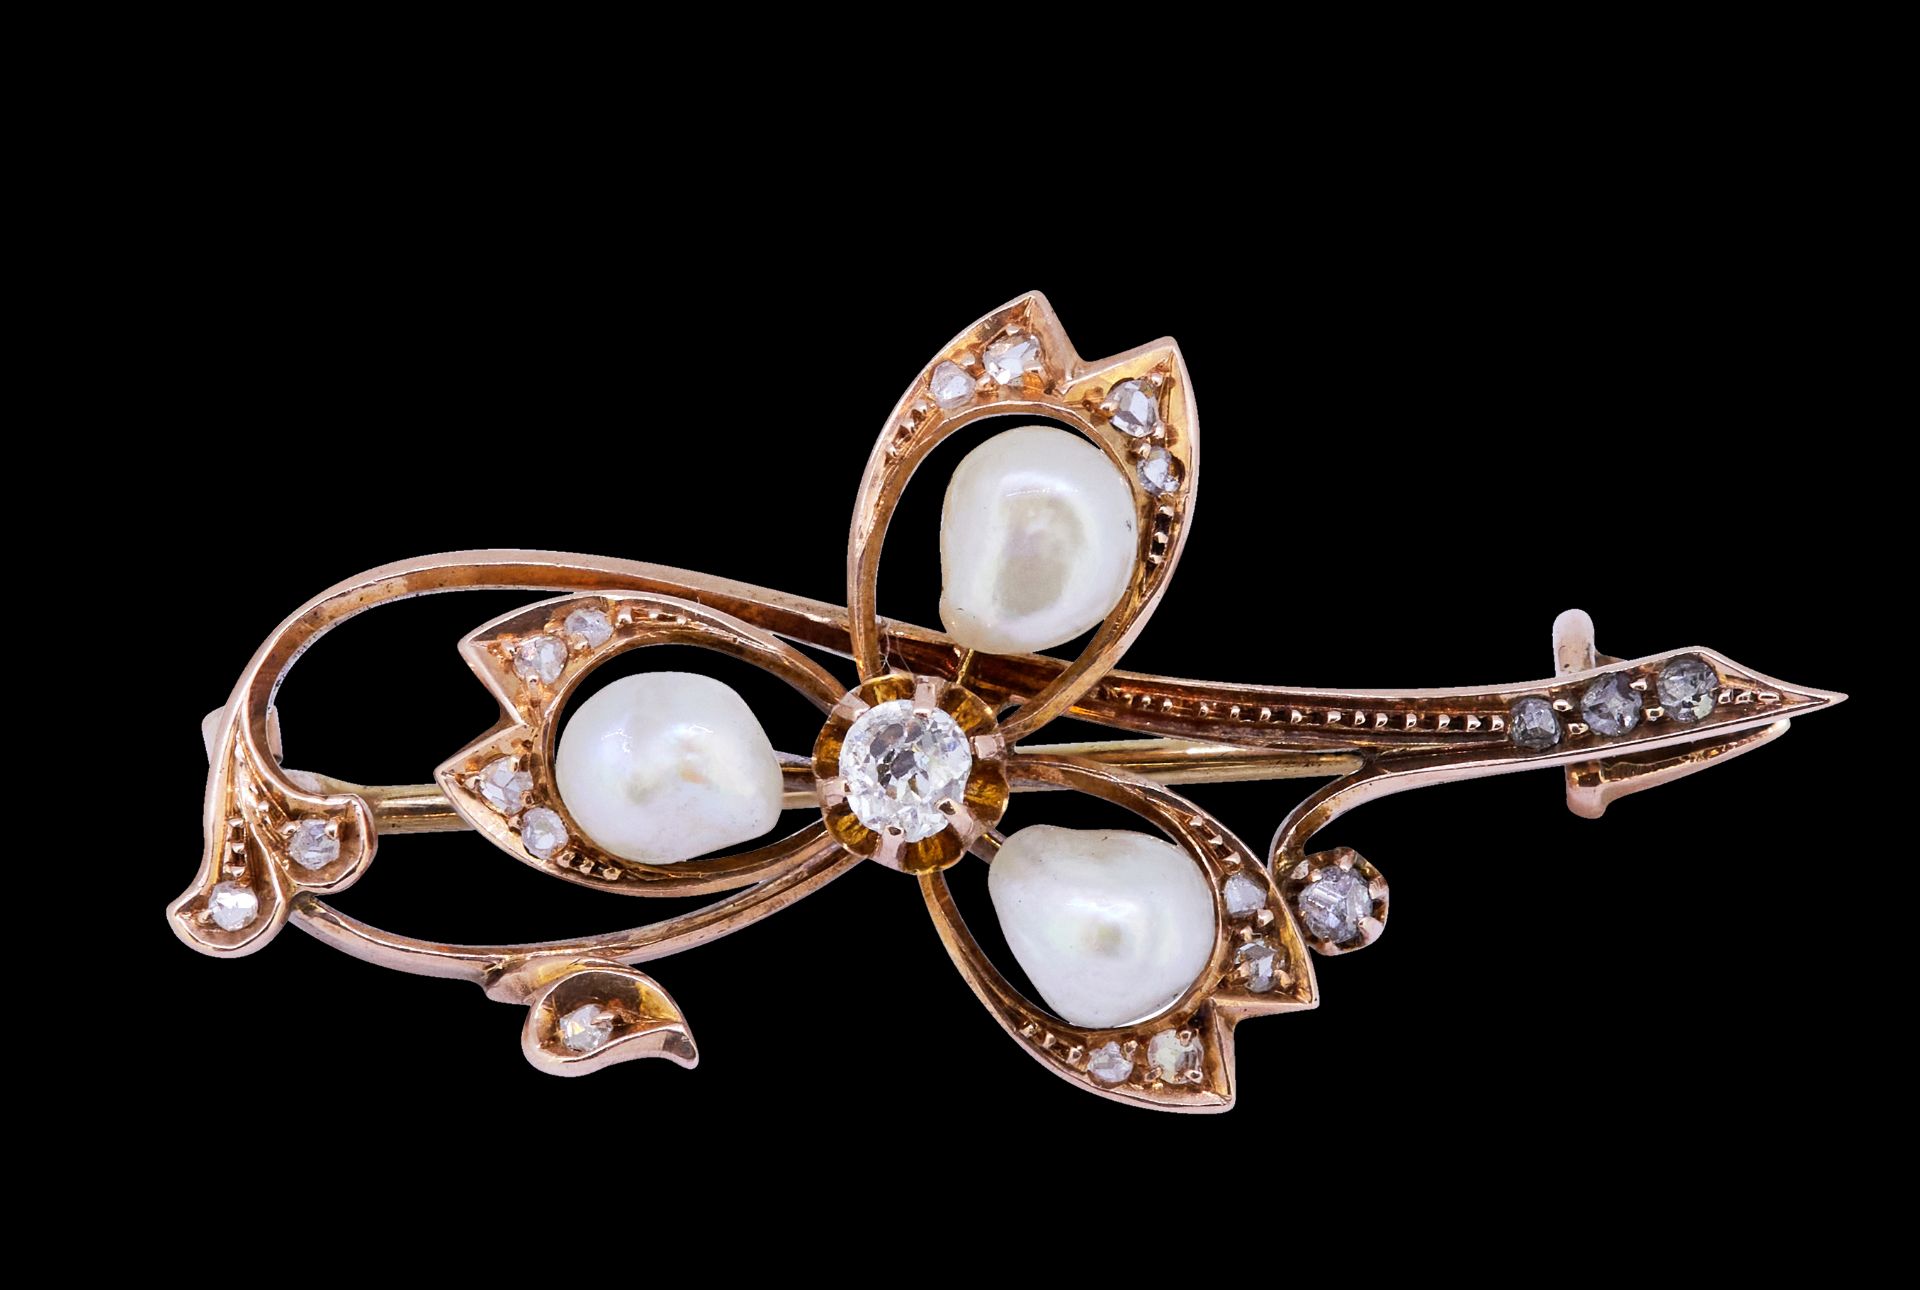 ANTIQUE VICTORIAN PEARL AND DIAMOND FLORAL BROOCH